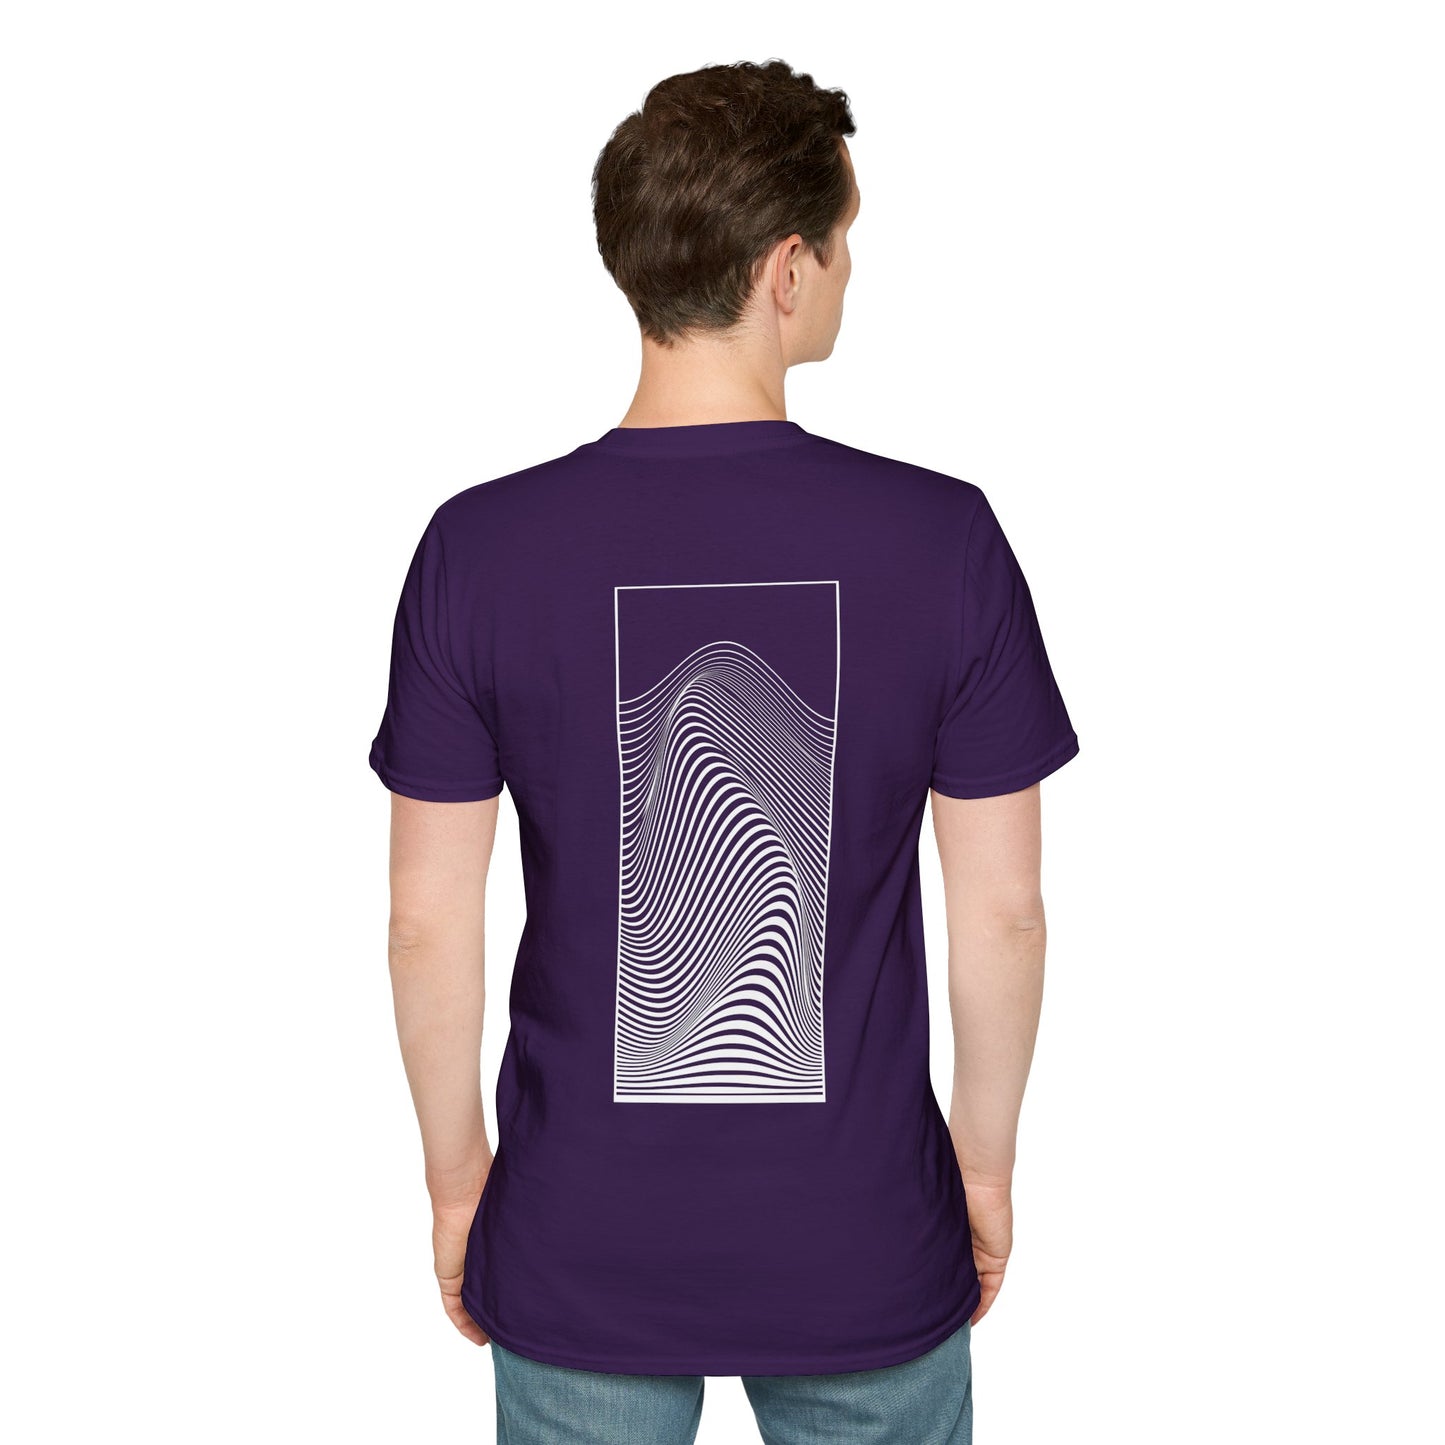 Violet T-shirt with a black and white optical illusion design of swirling patterns